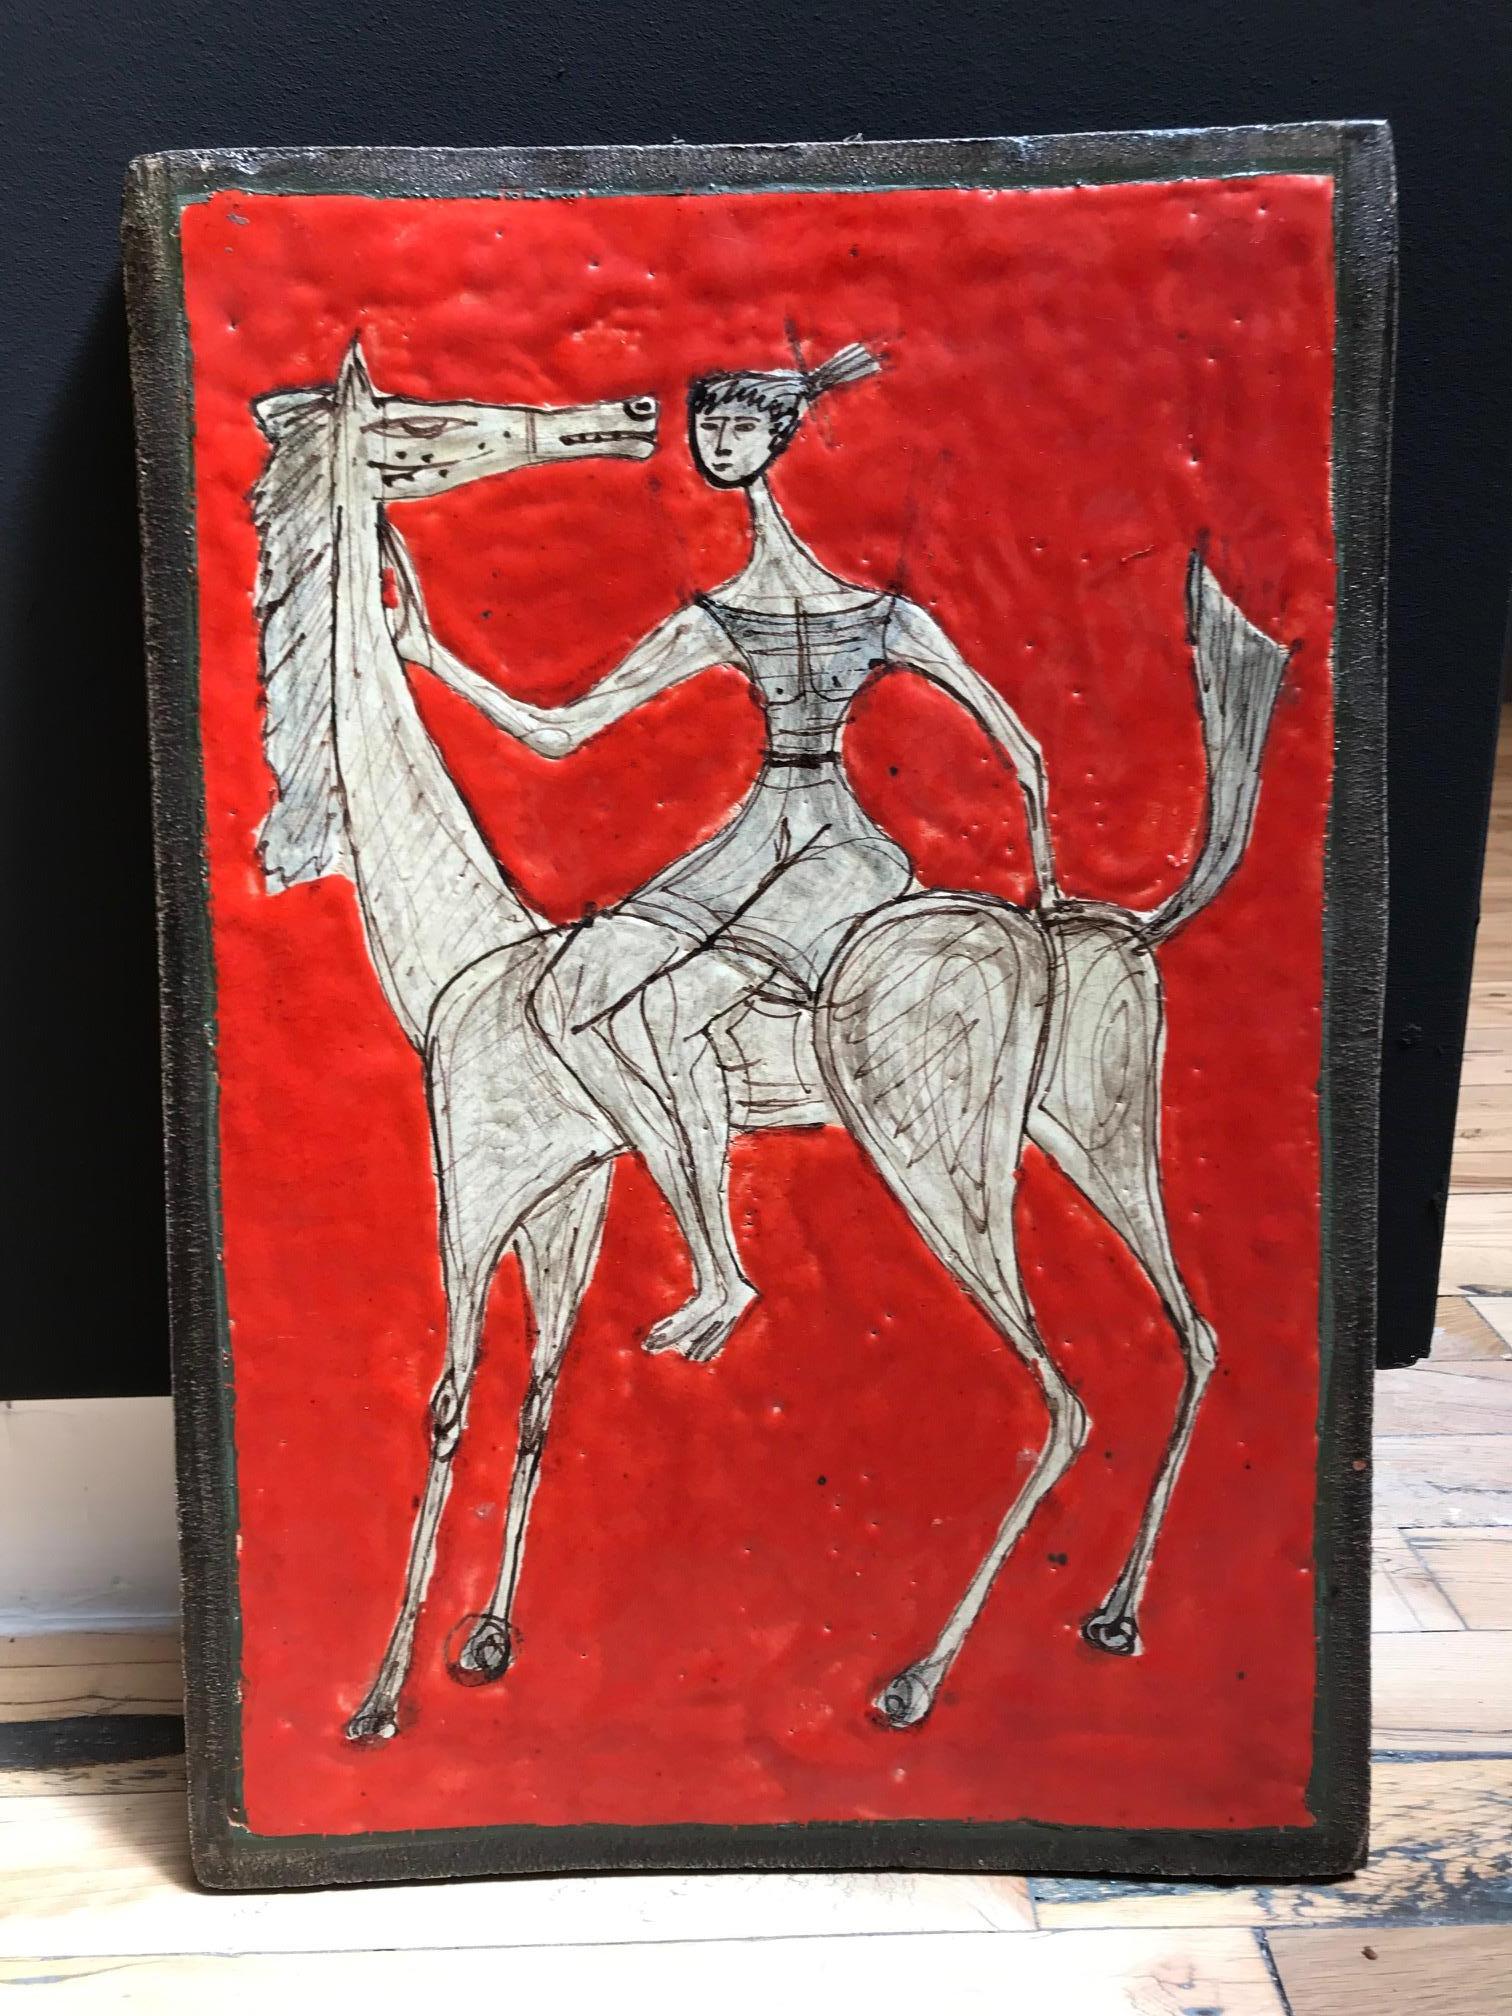 Red glazed ceramic Italian plaque of a woman on a horse in the style of Marcello Fantoni.